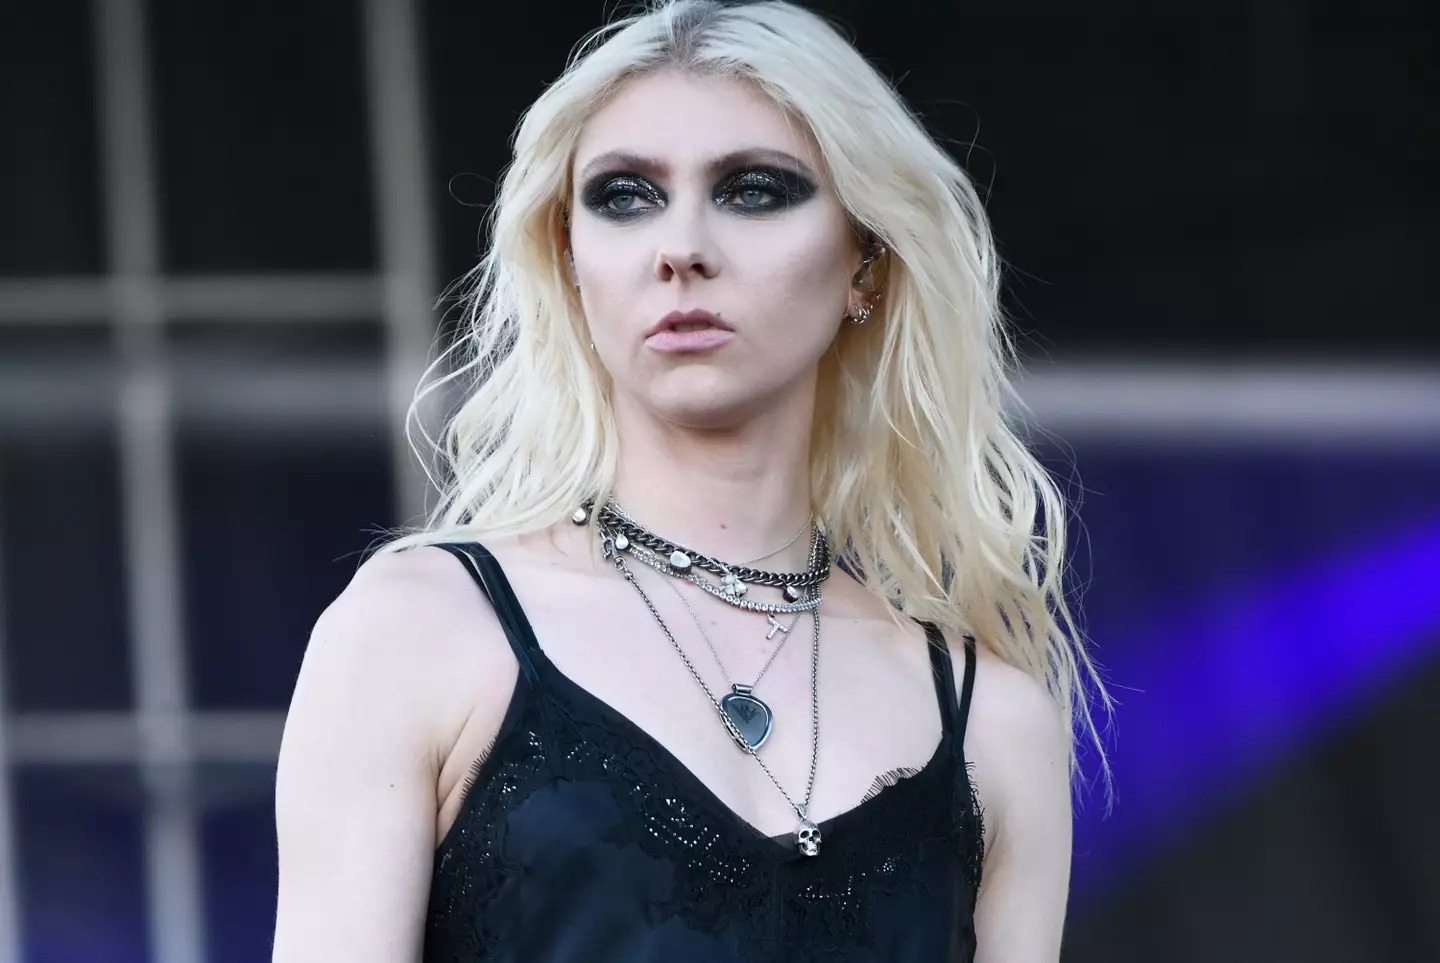 Momsen is now frontwoman for The Pretty Reckless.